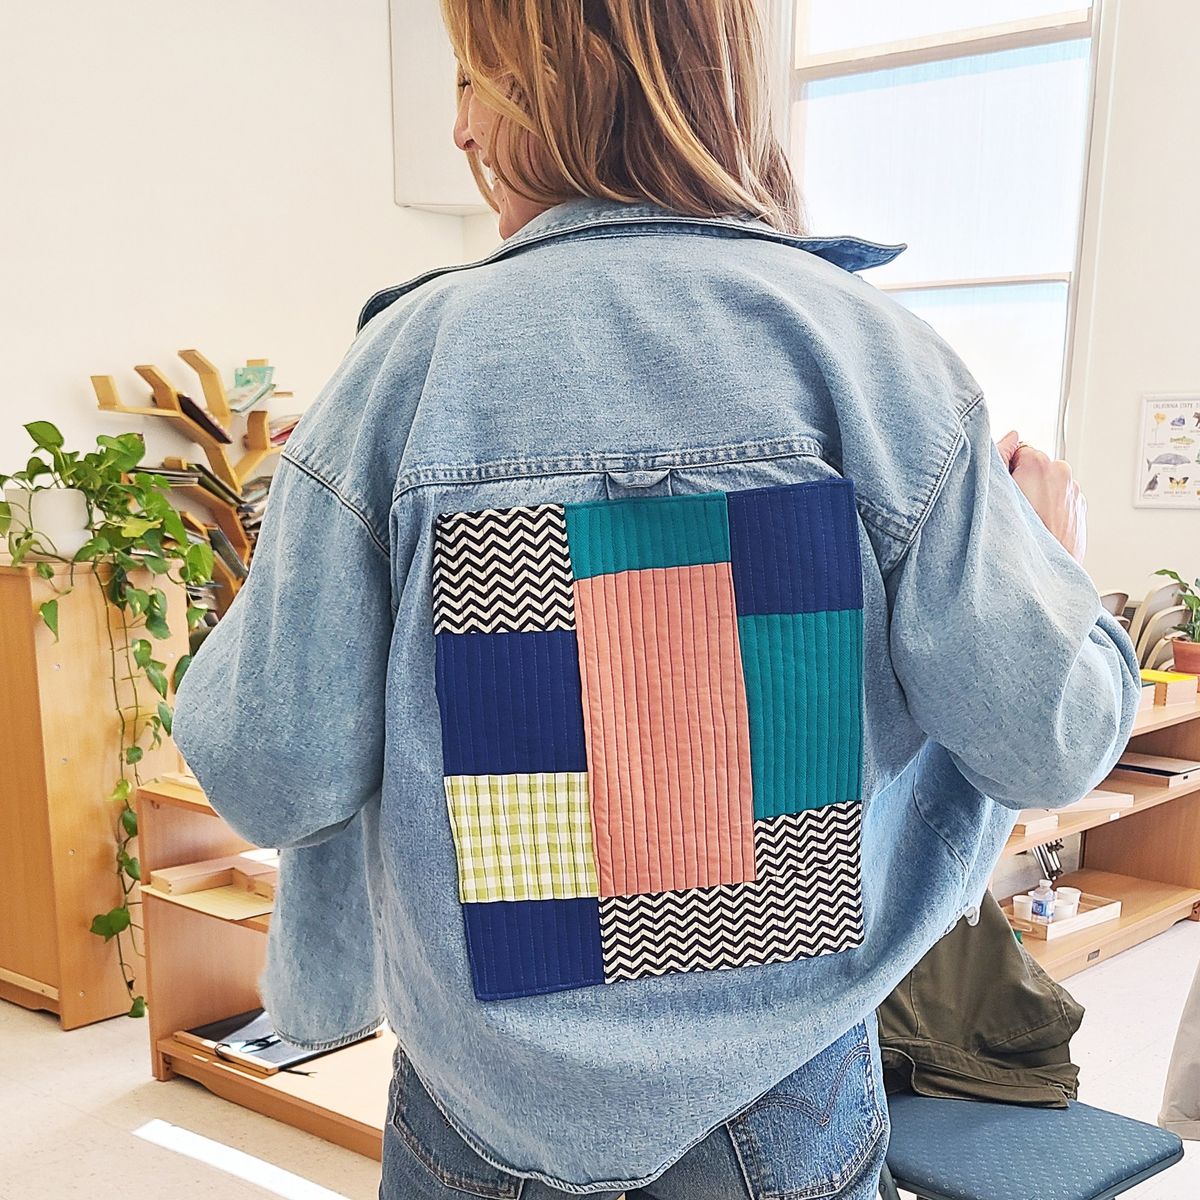 Learn to Quilt | Upgrade a Jacket or Bag